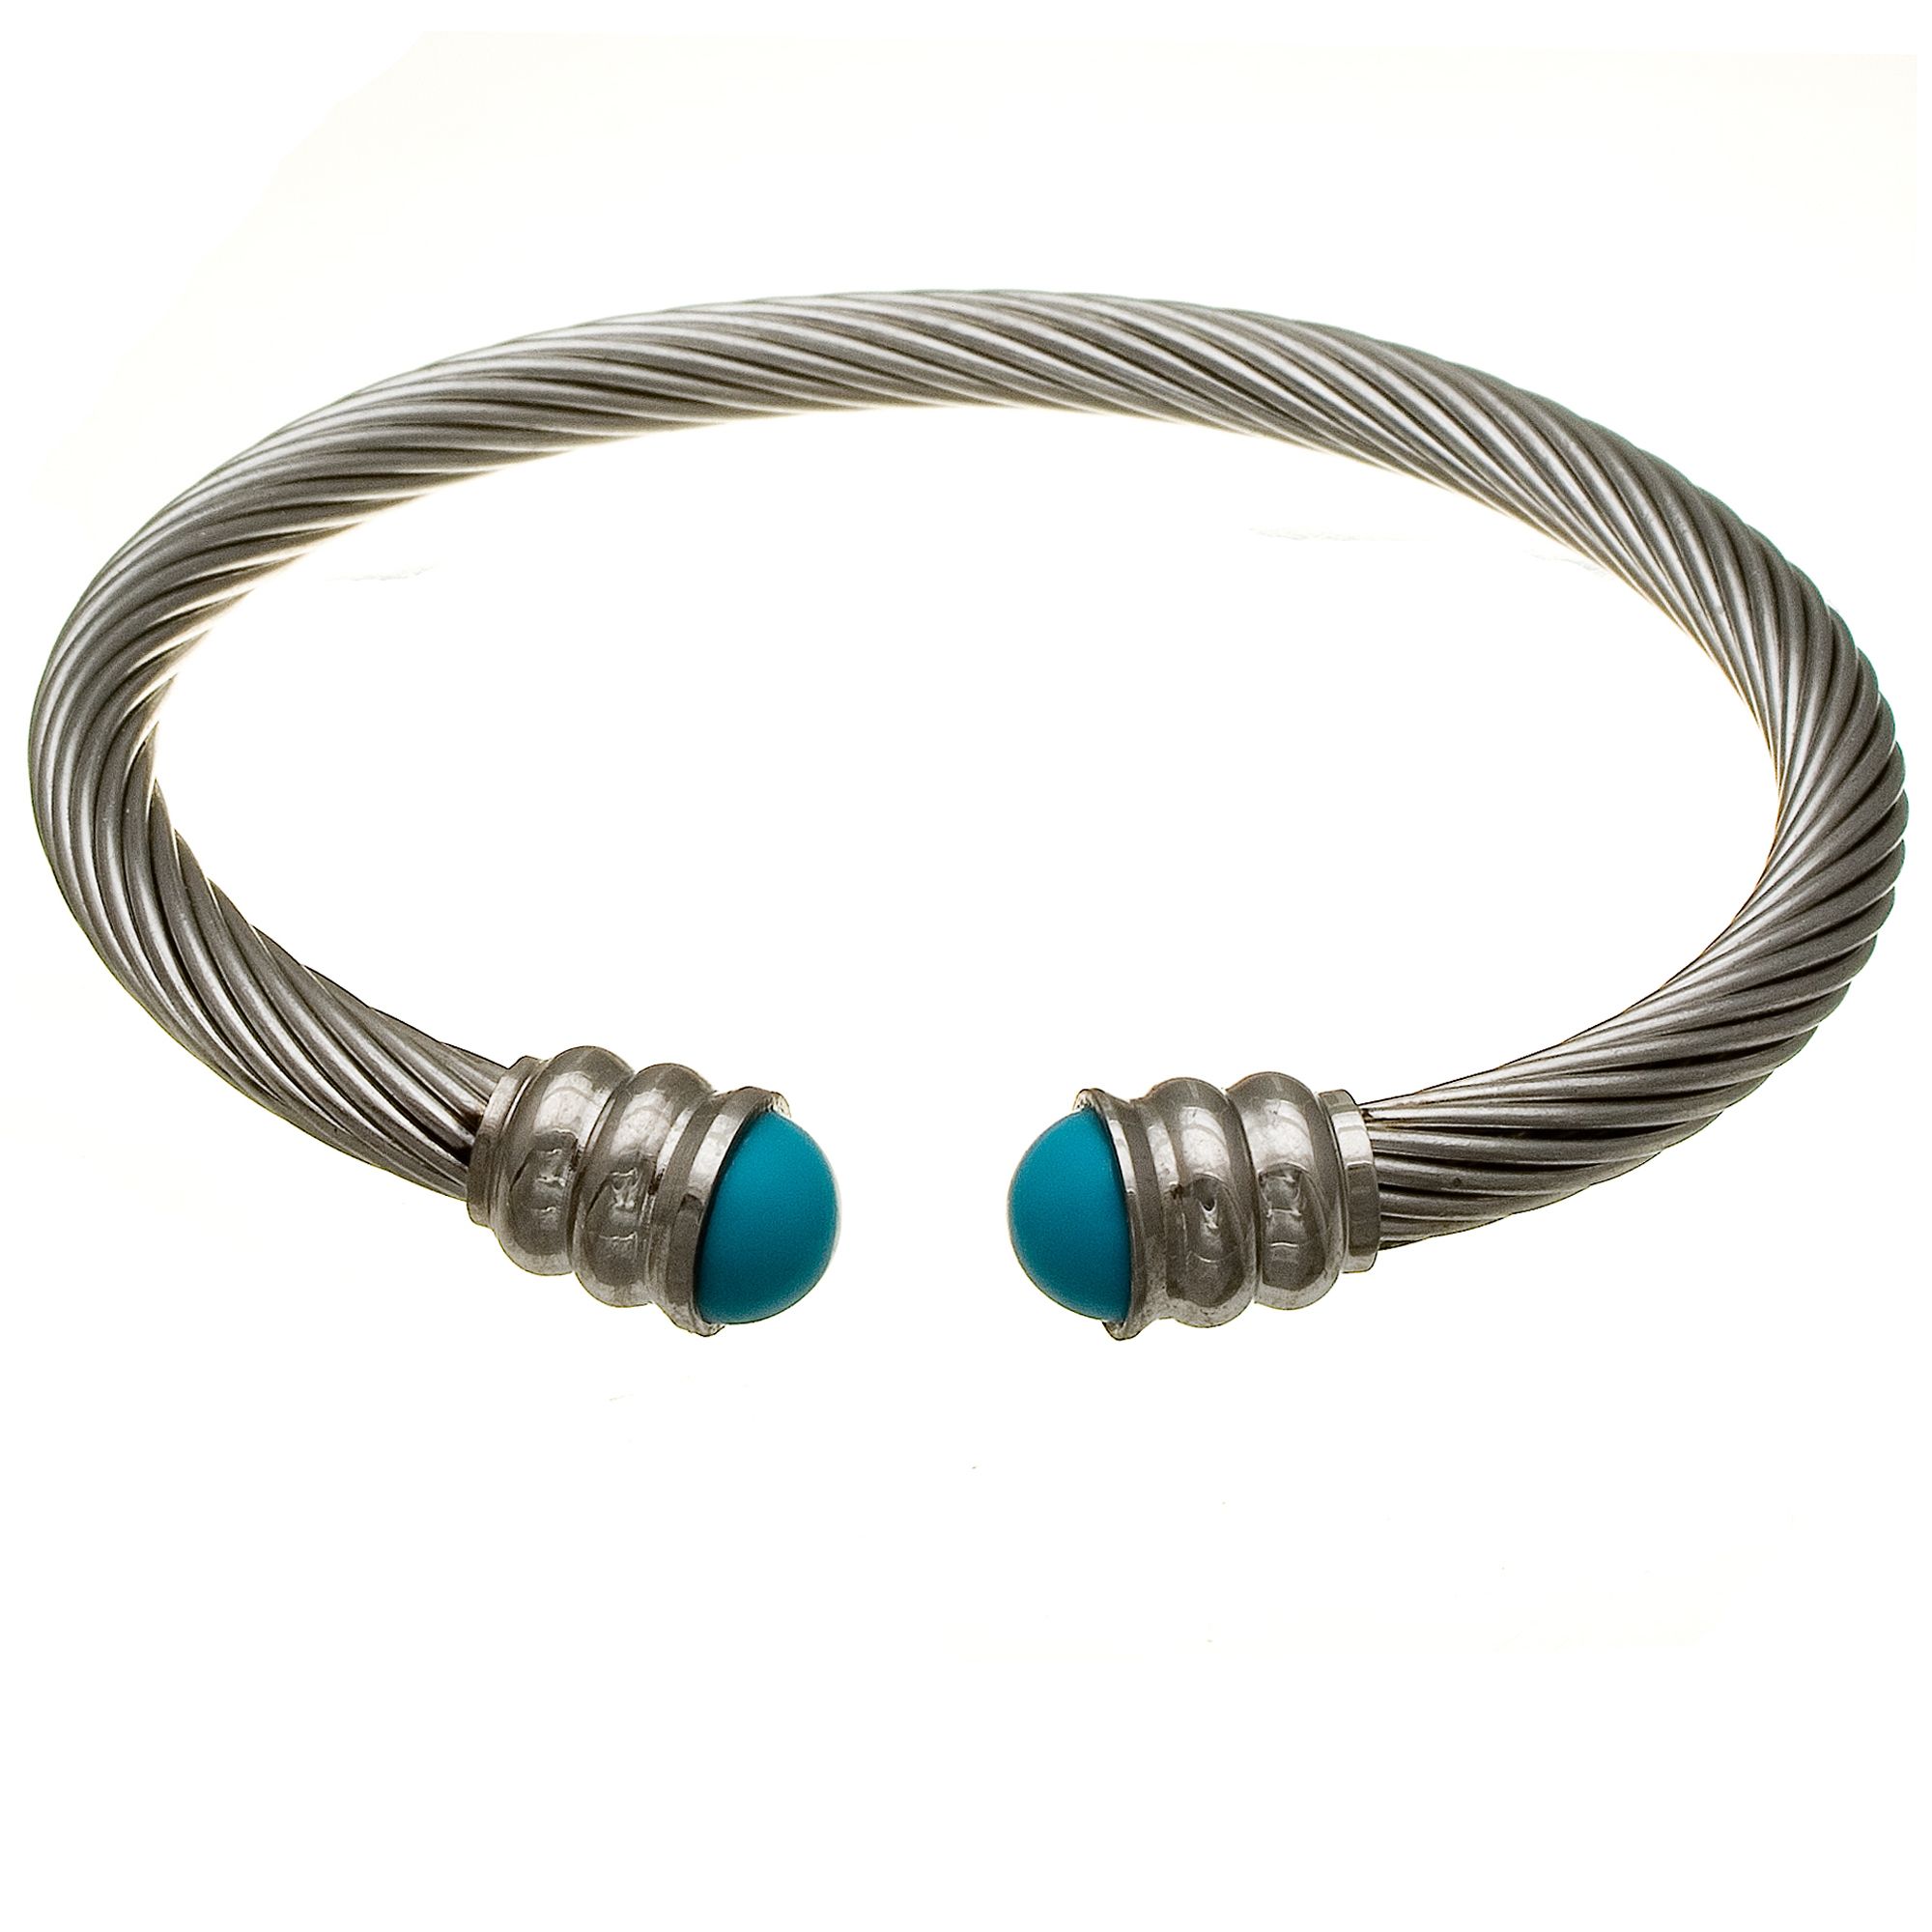 Stainless Steel Twist Bangle Bracelet with Turquoise Stone Accents